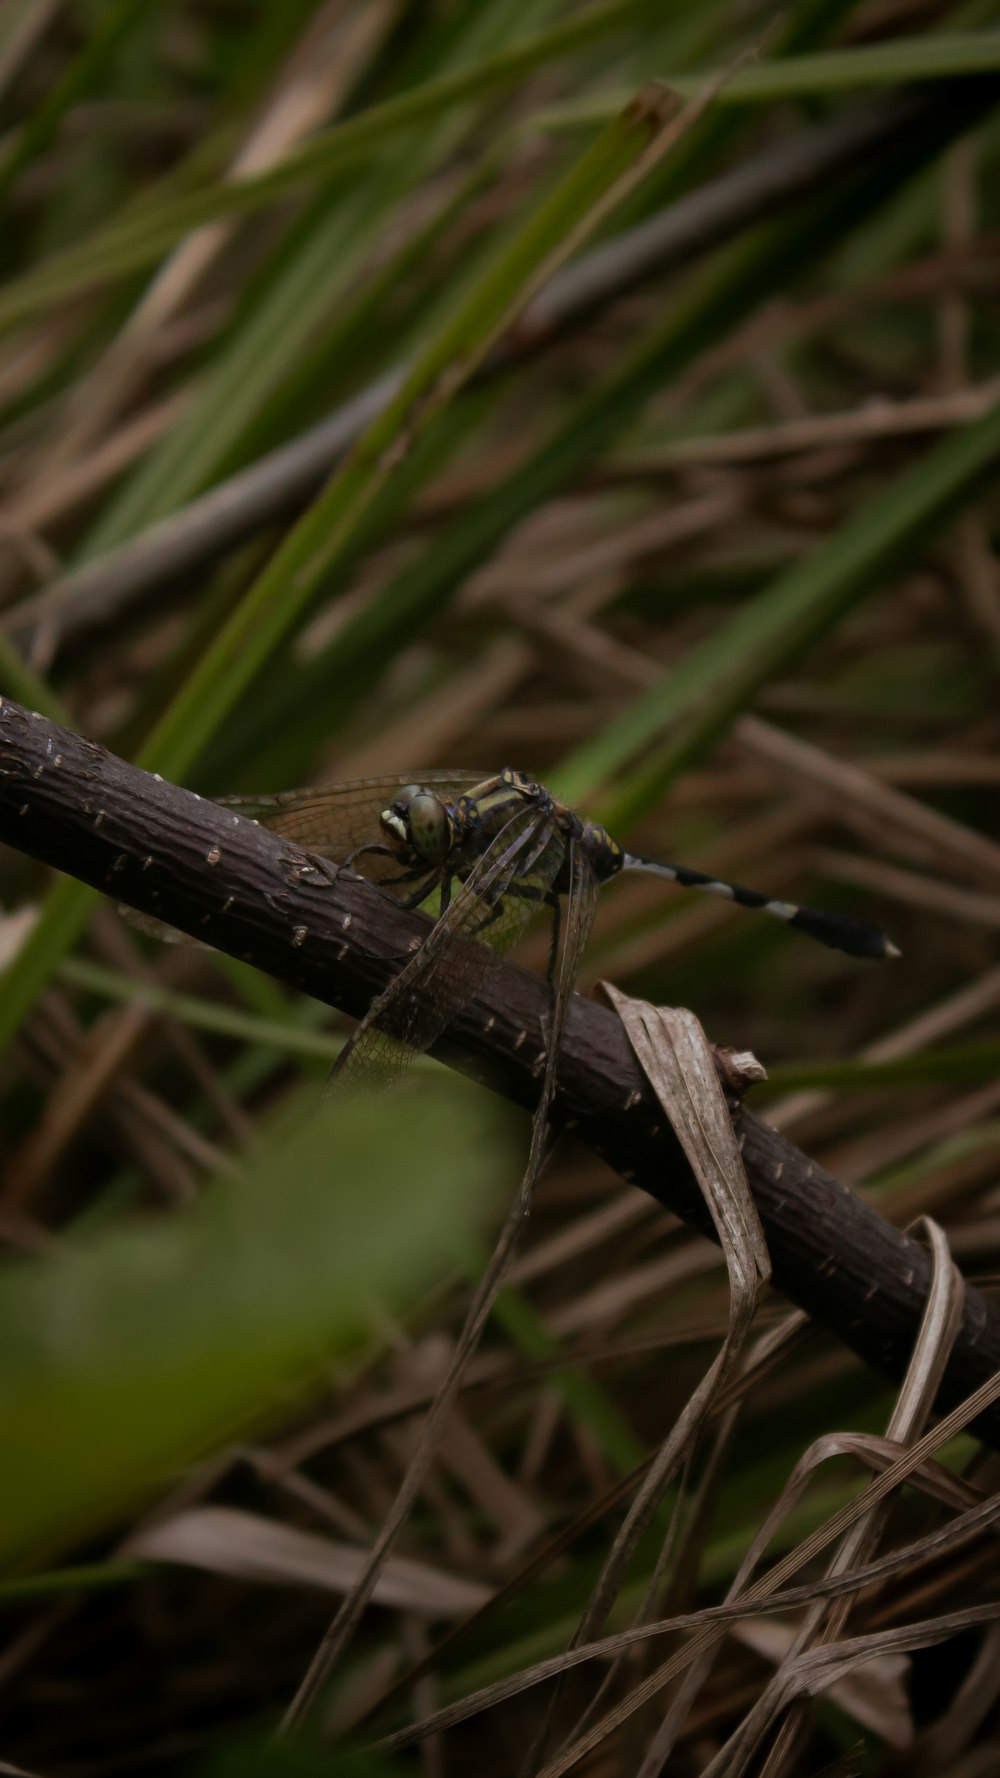 a dragonfly resting on a stick in the grass